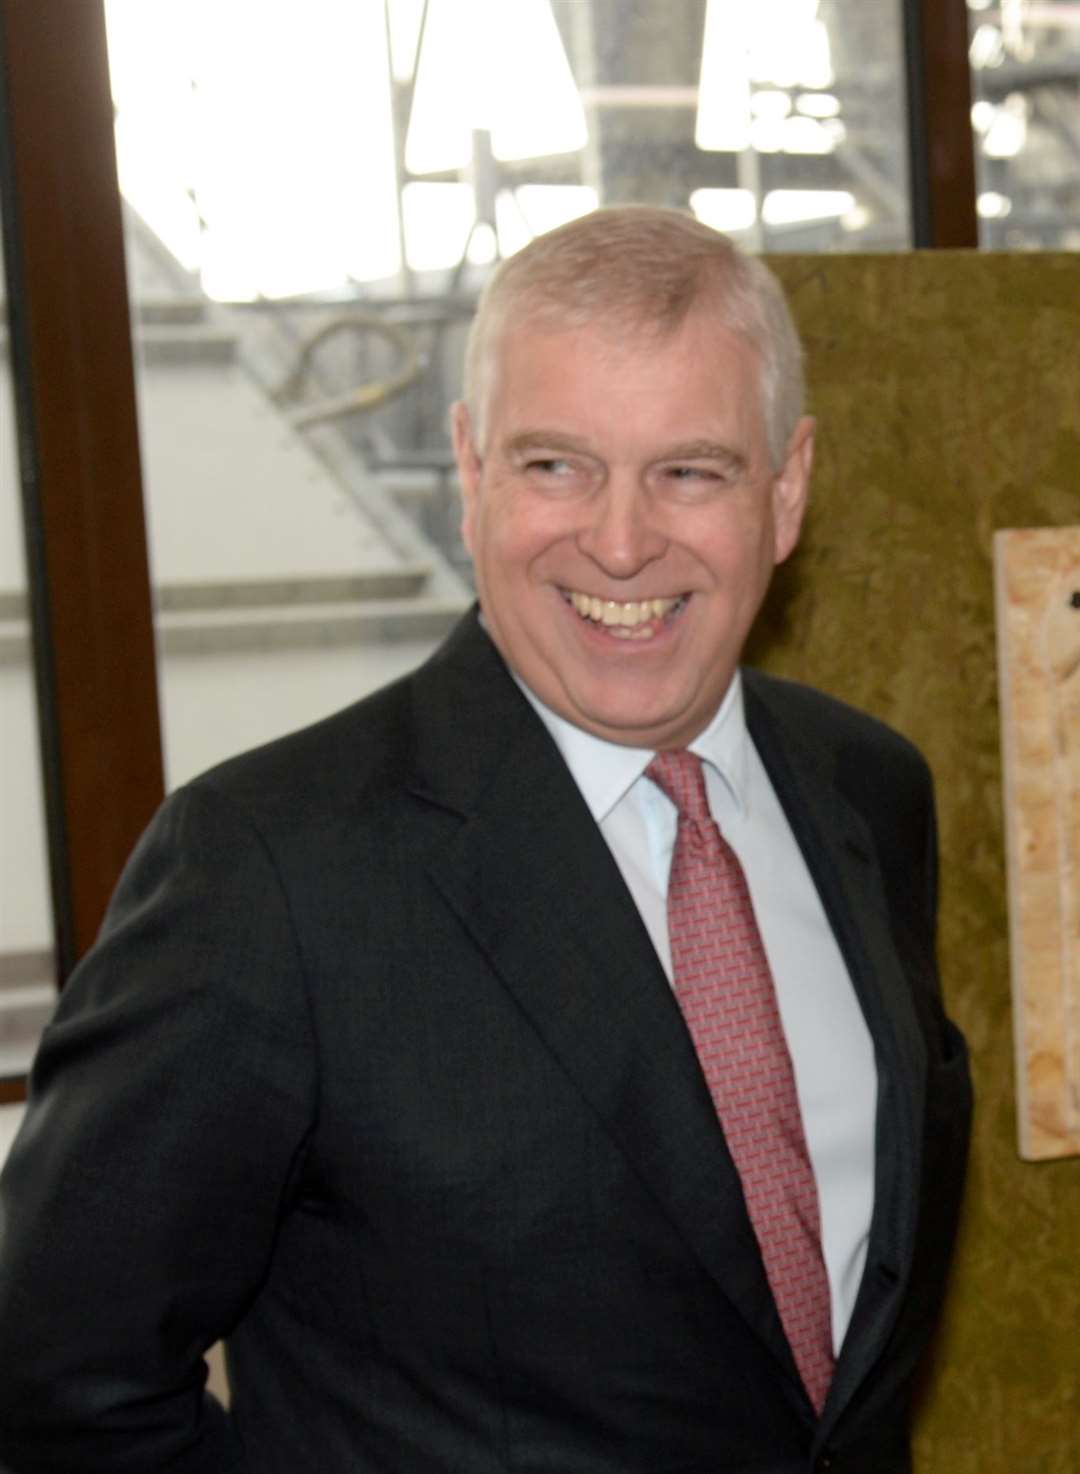 Prince Andrew holds the title of Earl of Inverness.